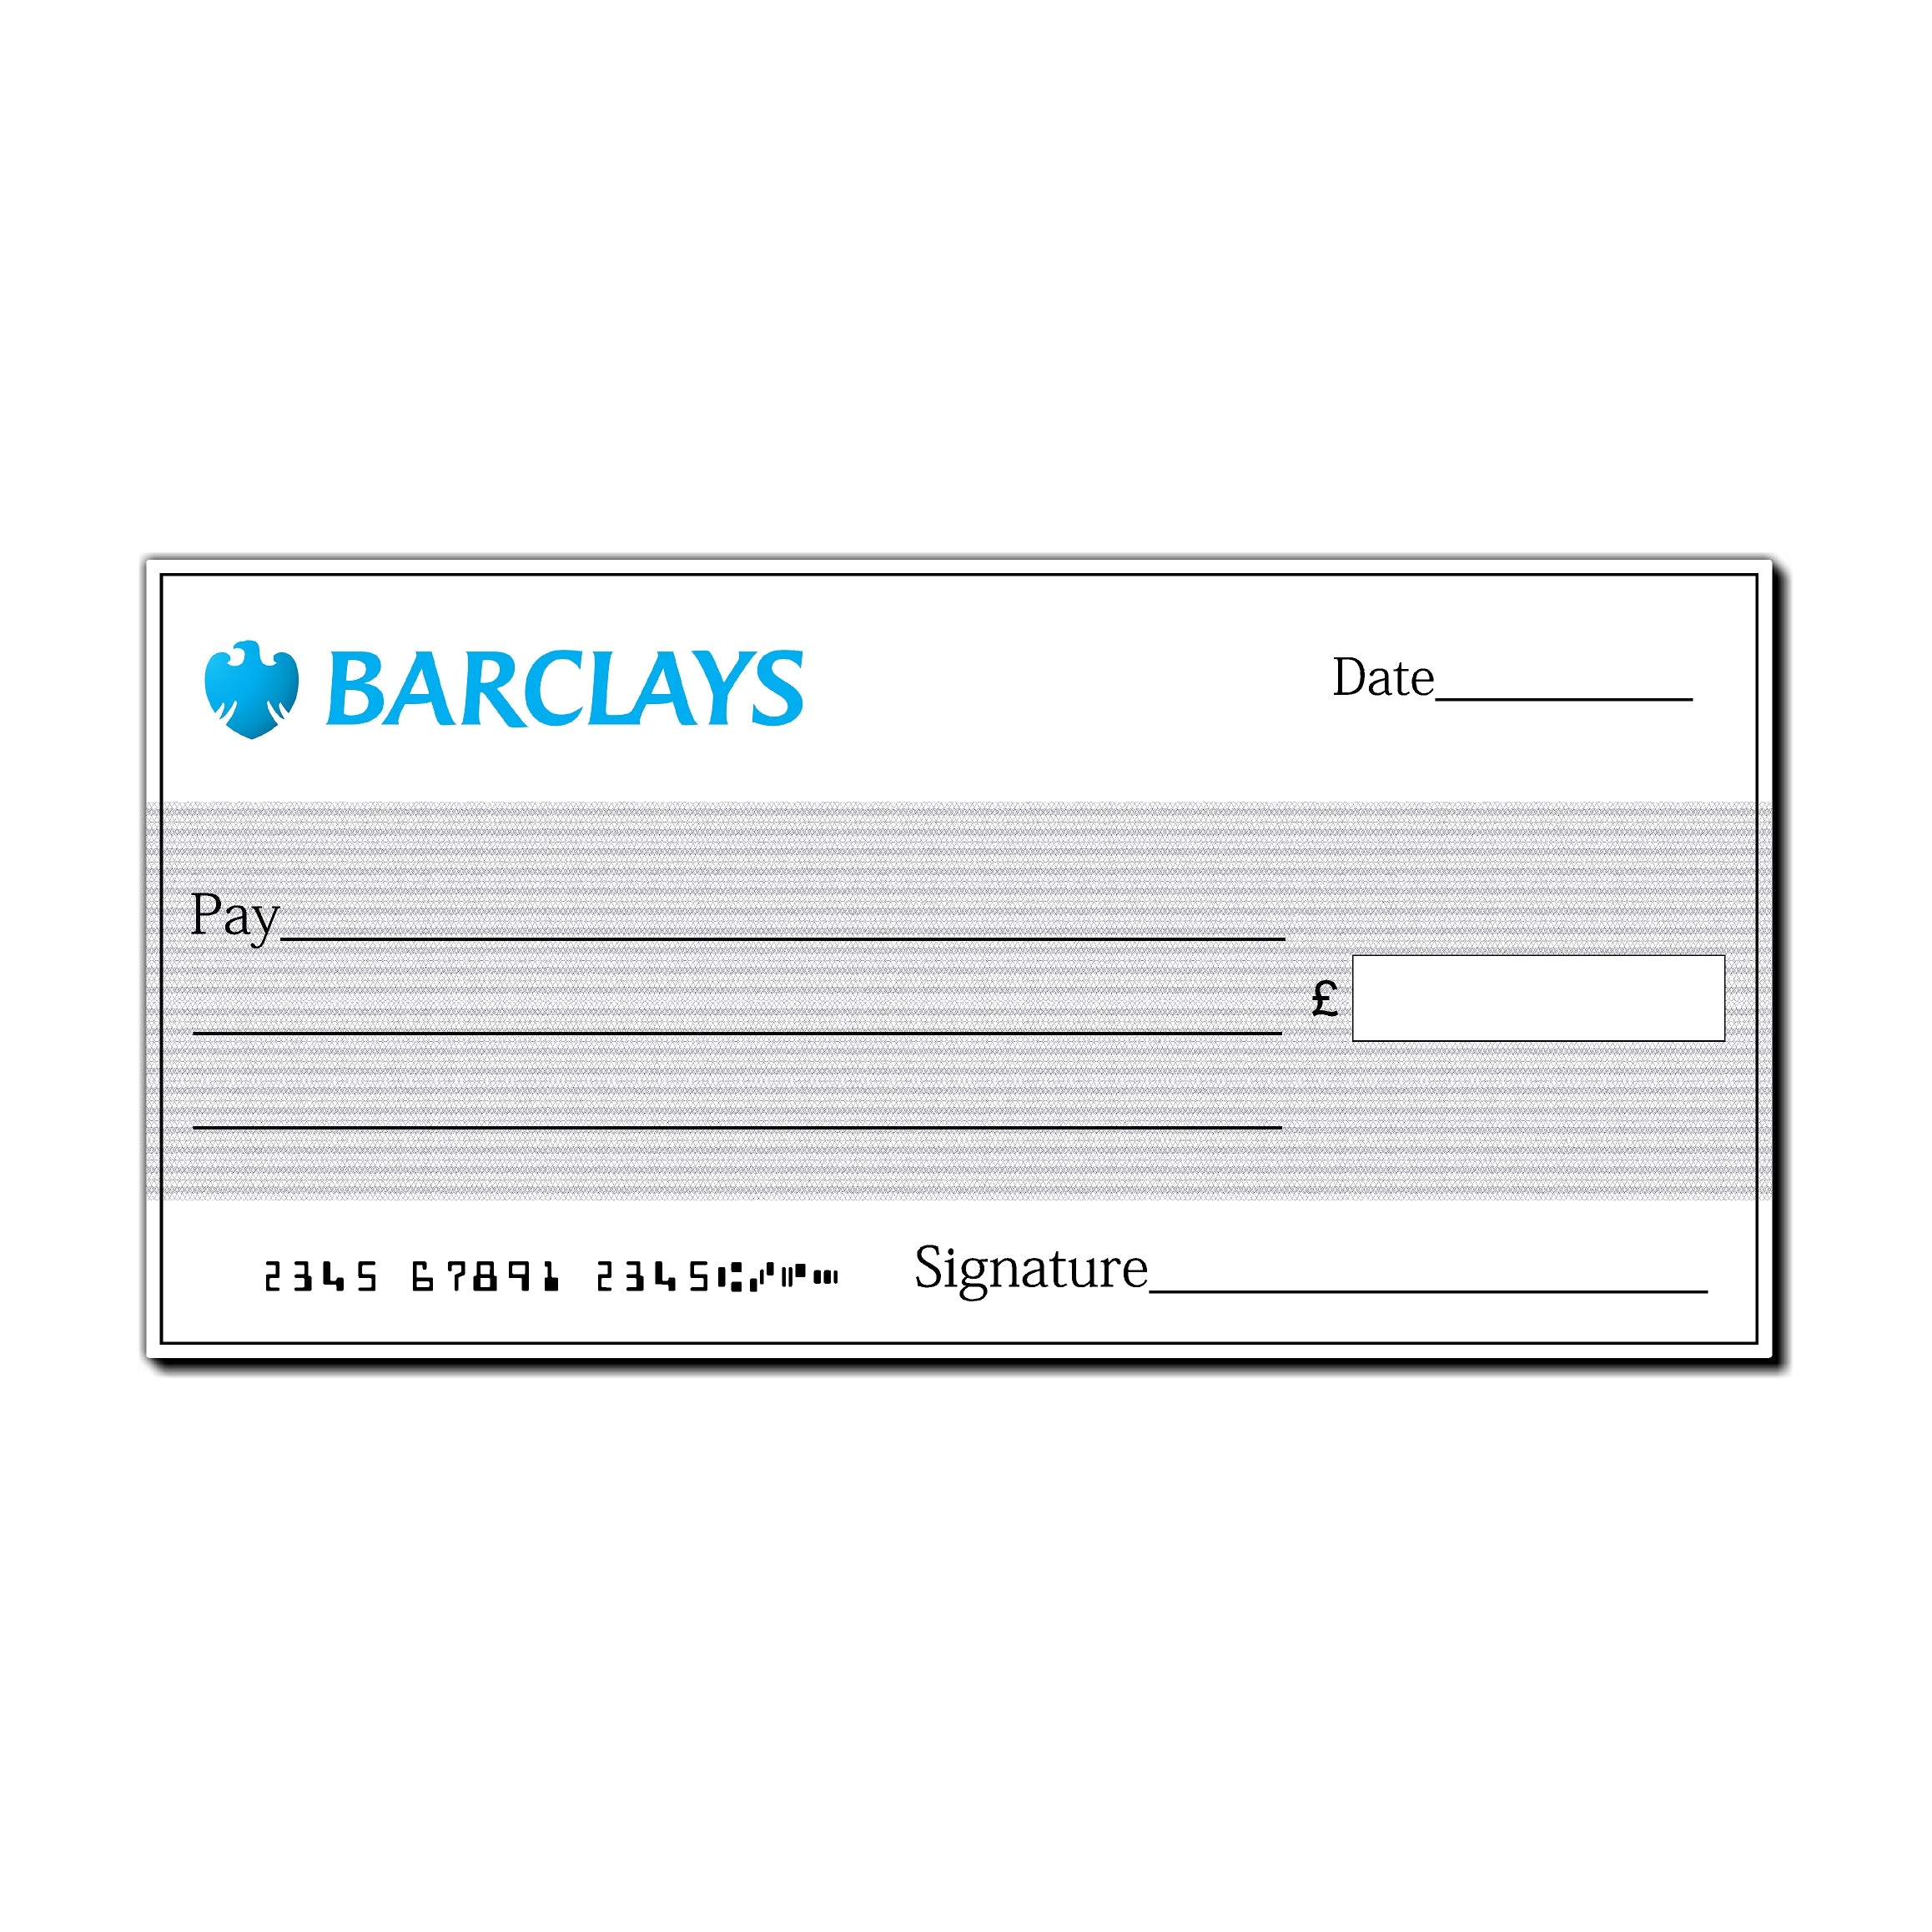 Giant Personalised Cheque Prop - Single Use